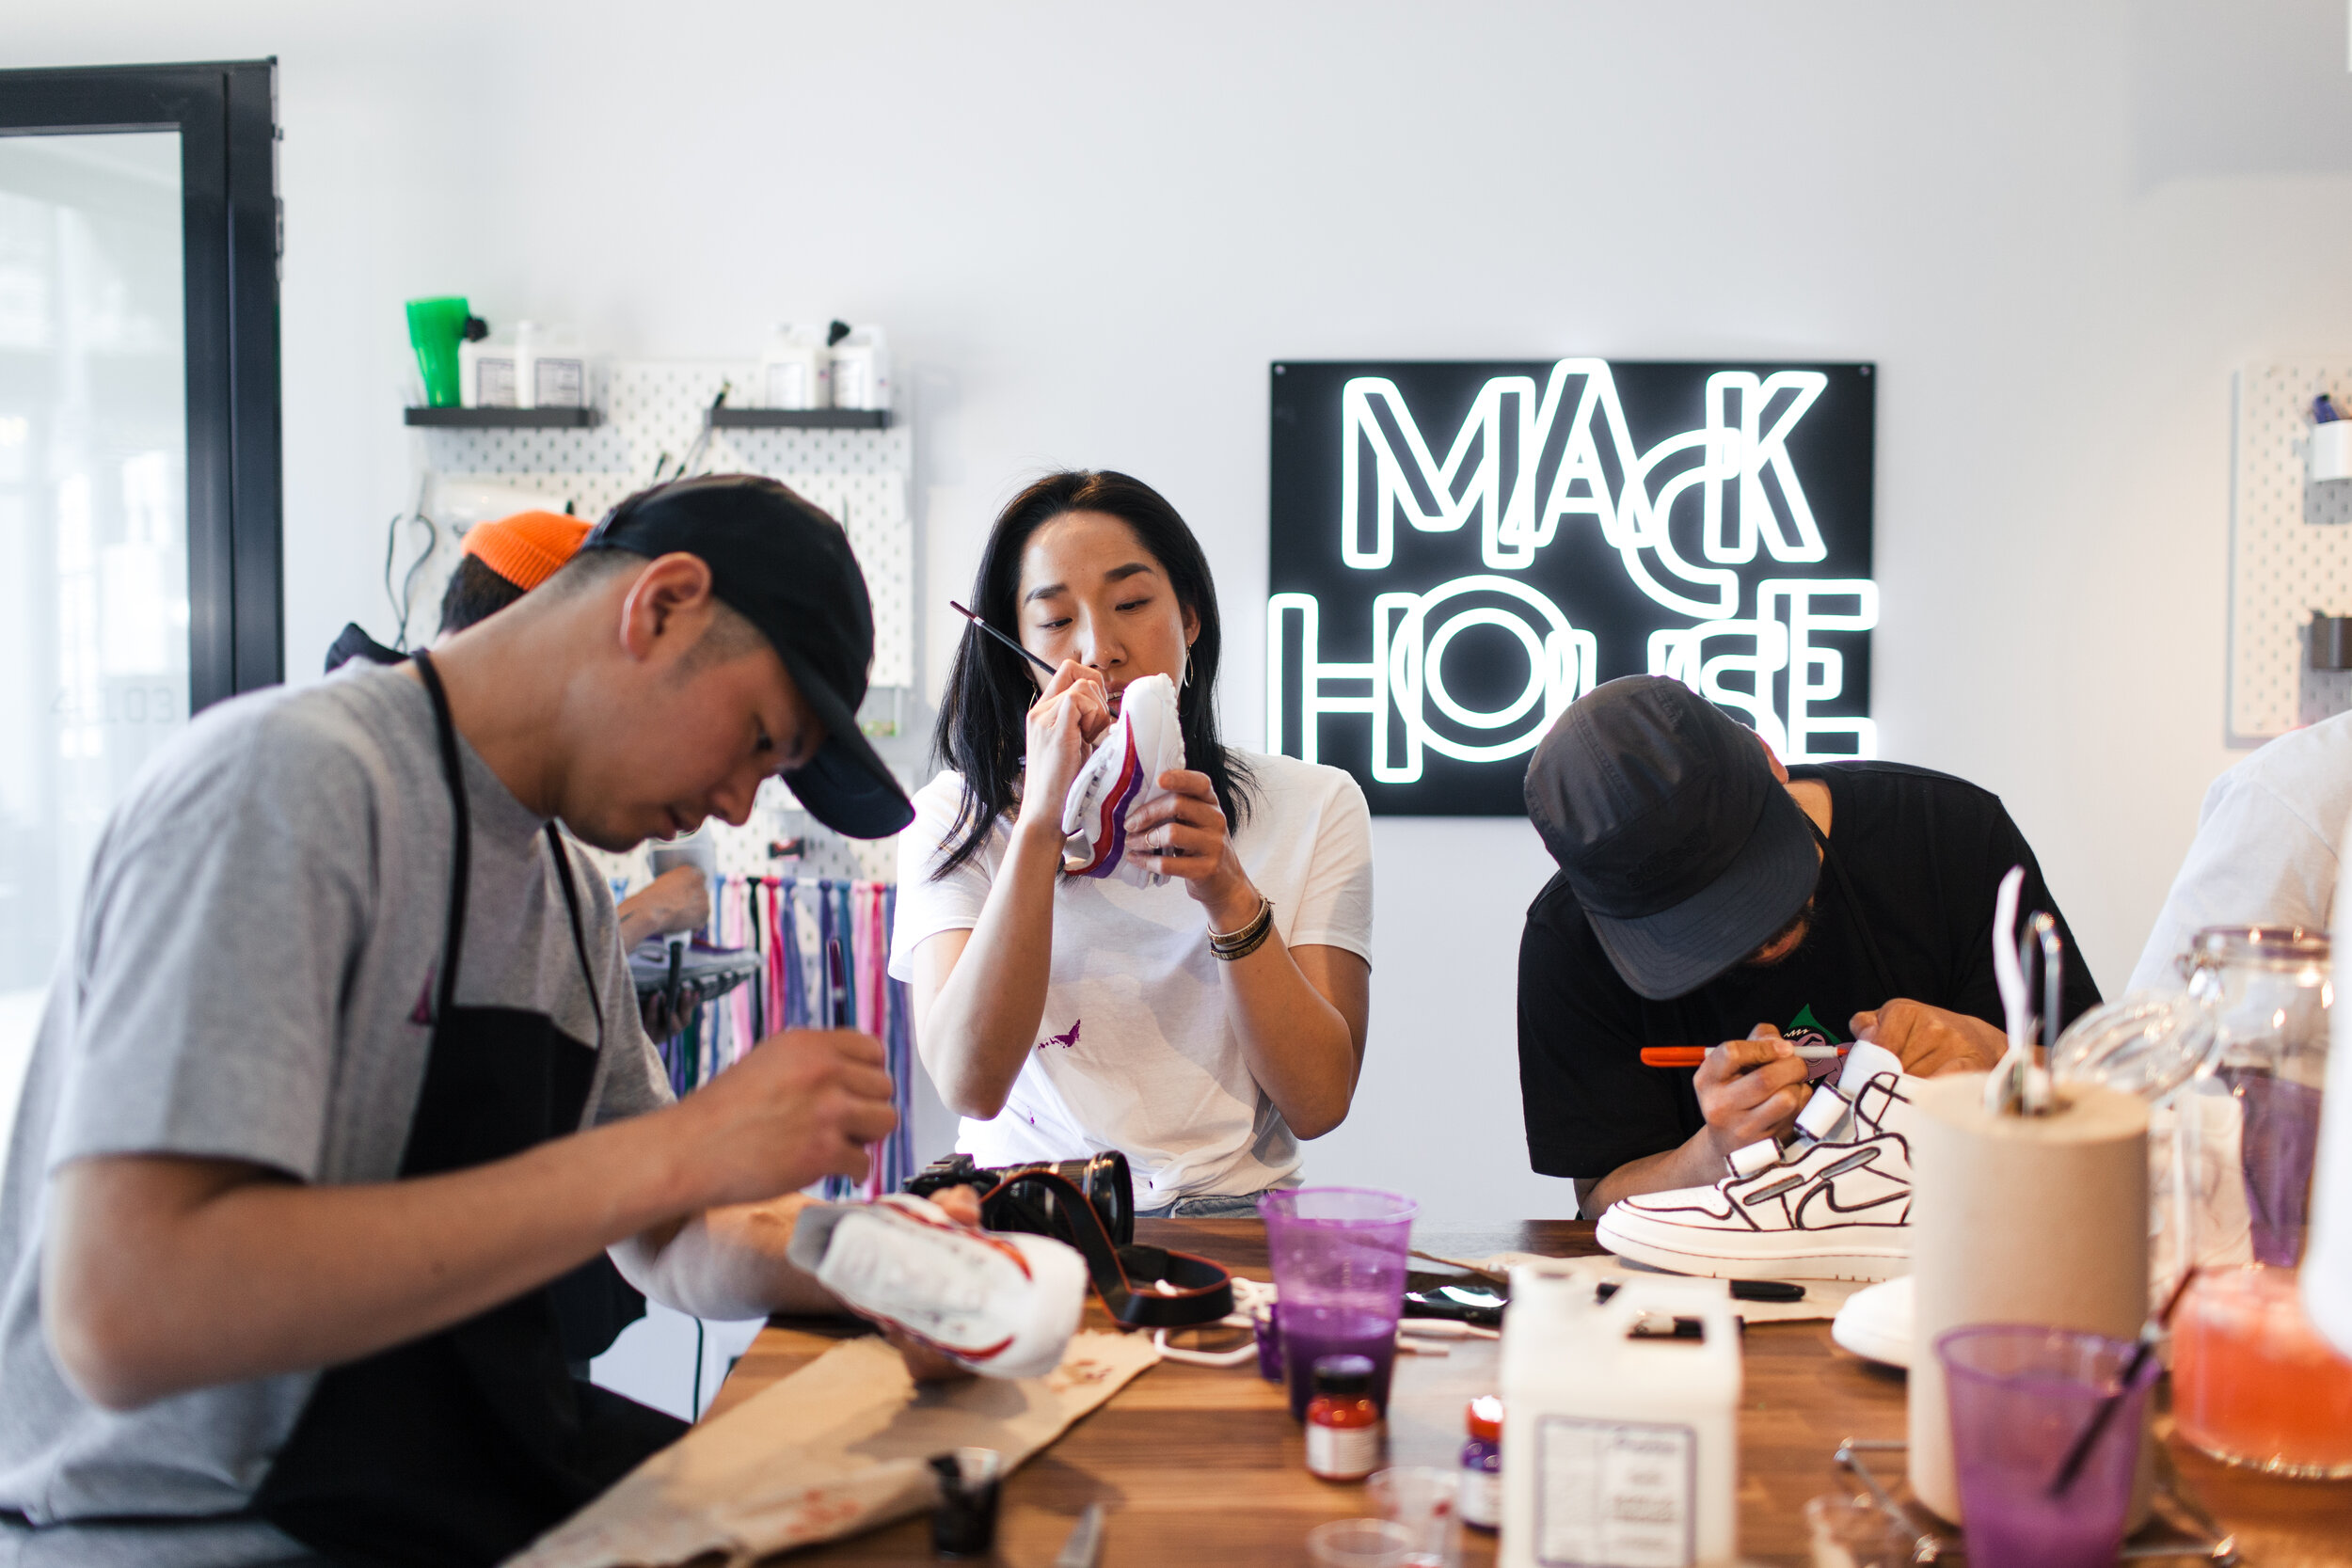 ABOUT — MACK HOUSE